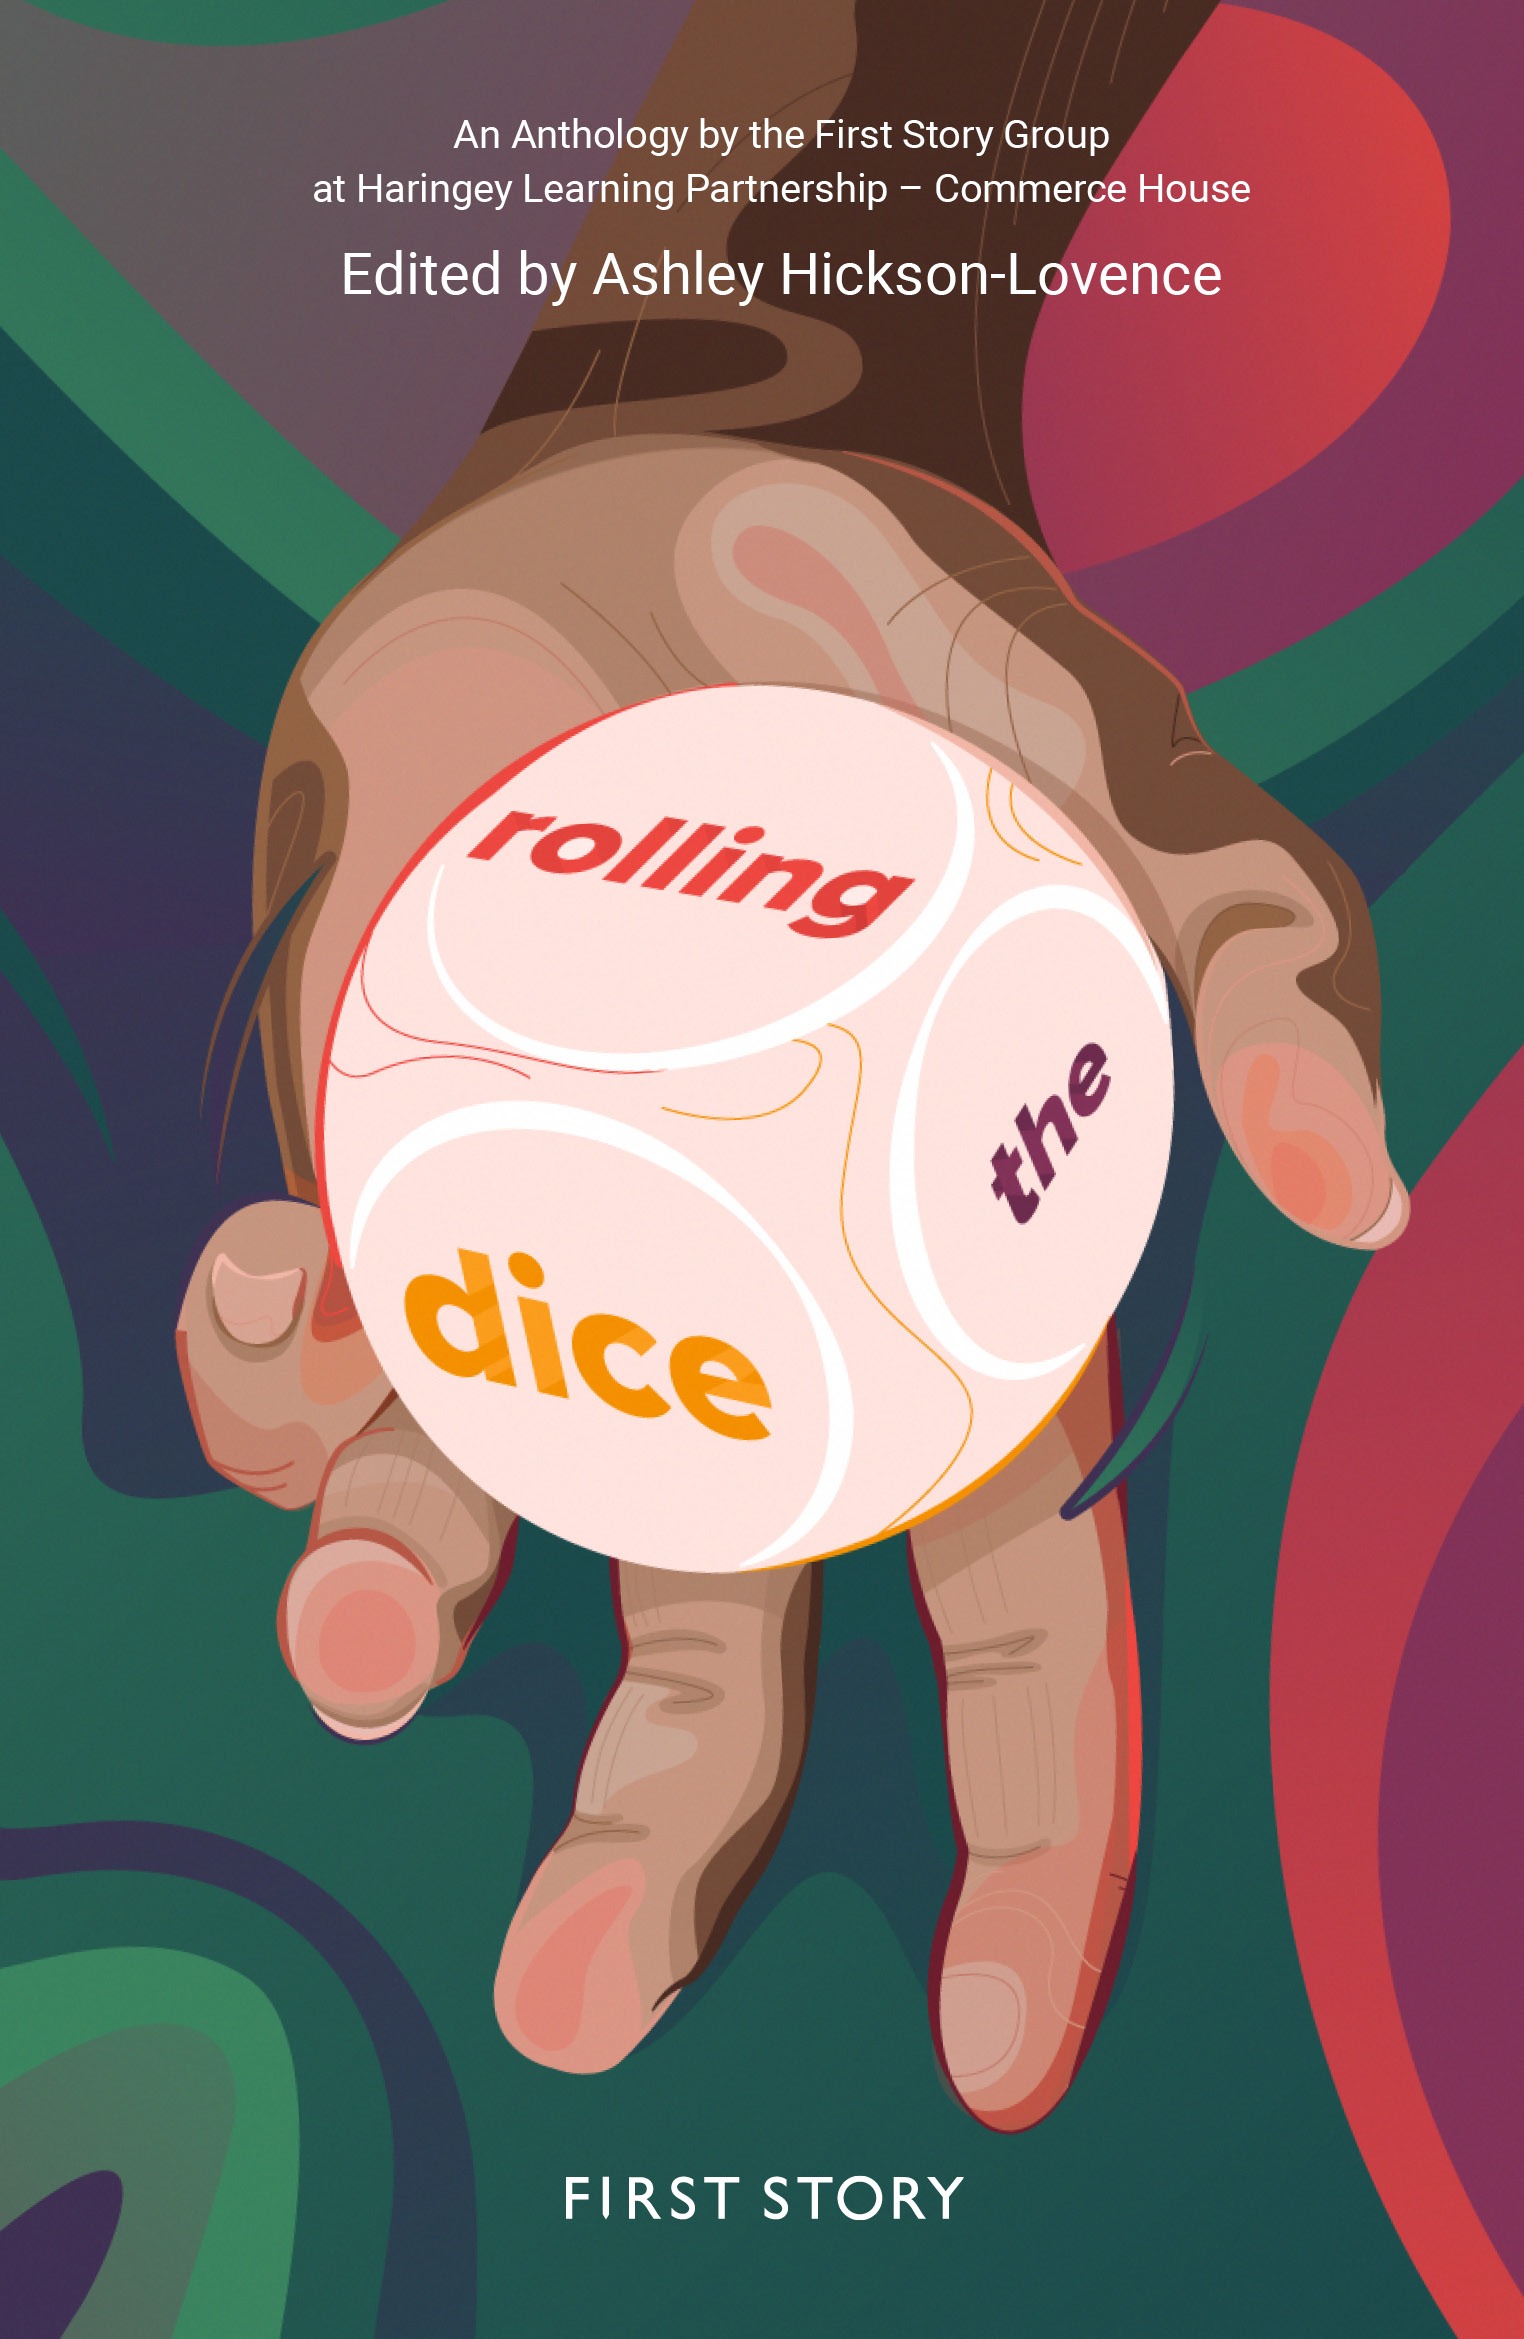 Cover of First Story Anthology for Commerce House, titled Rolling The Dice